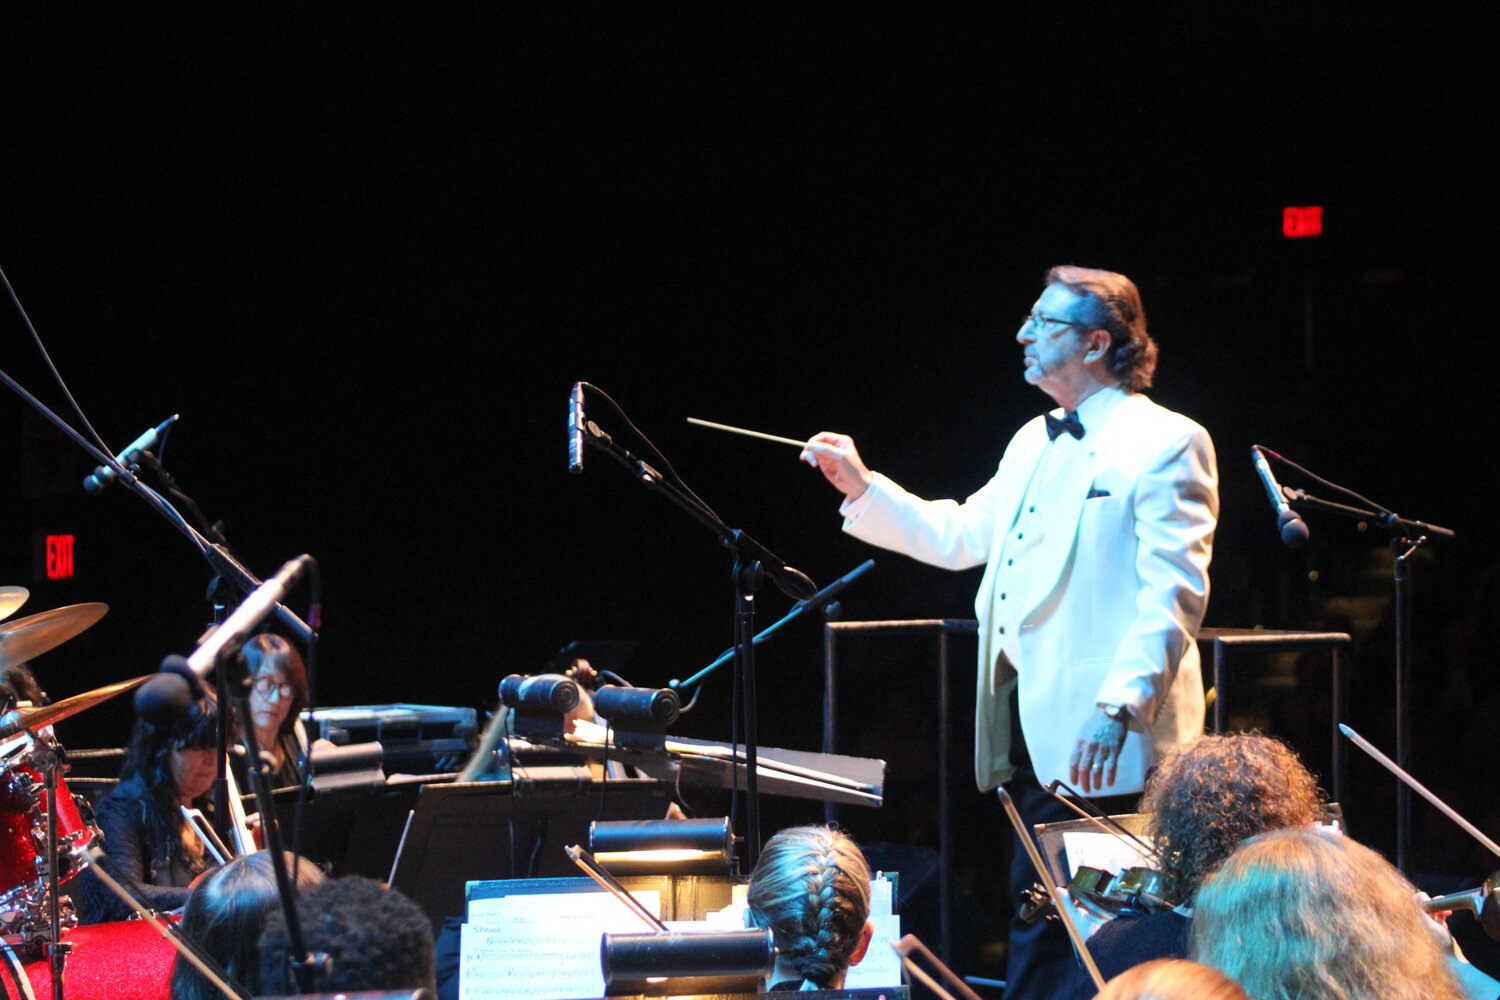 Maestro Louis Panacciulli conducts the Nassau Pops Symphony Orchestra, which he refers to as his “family.”